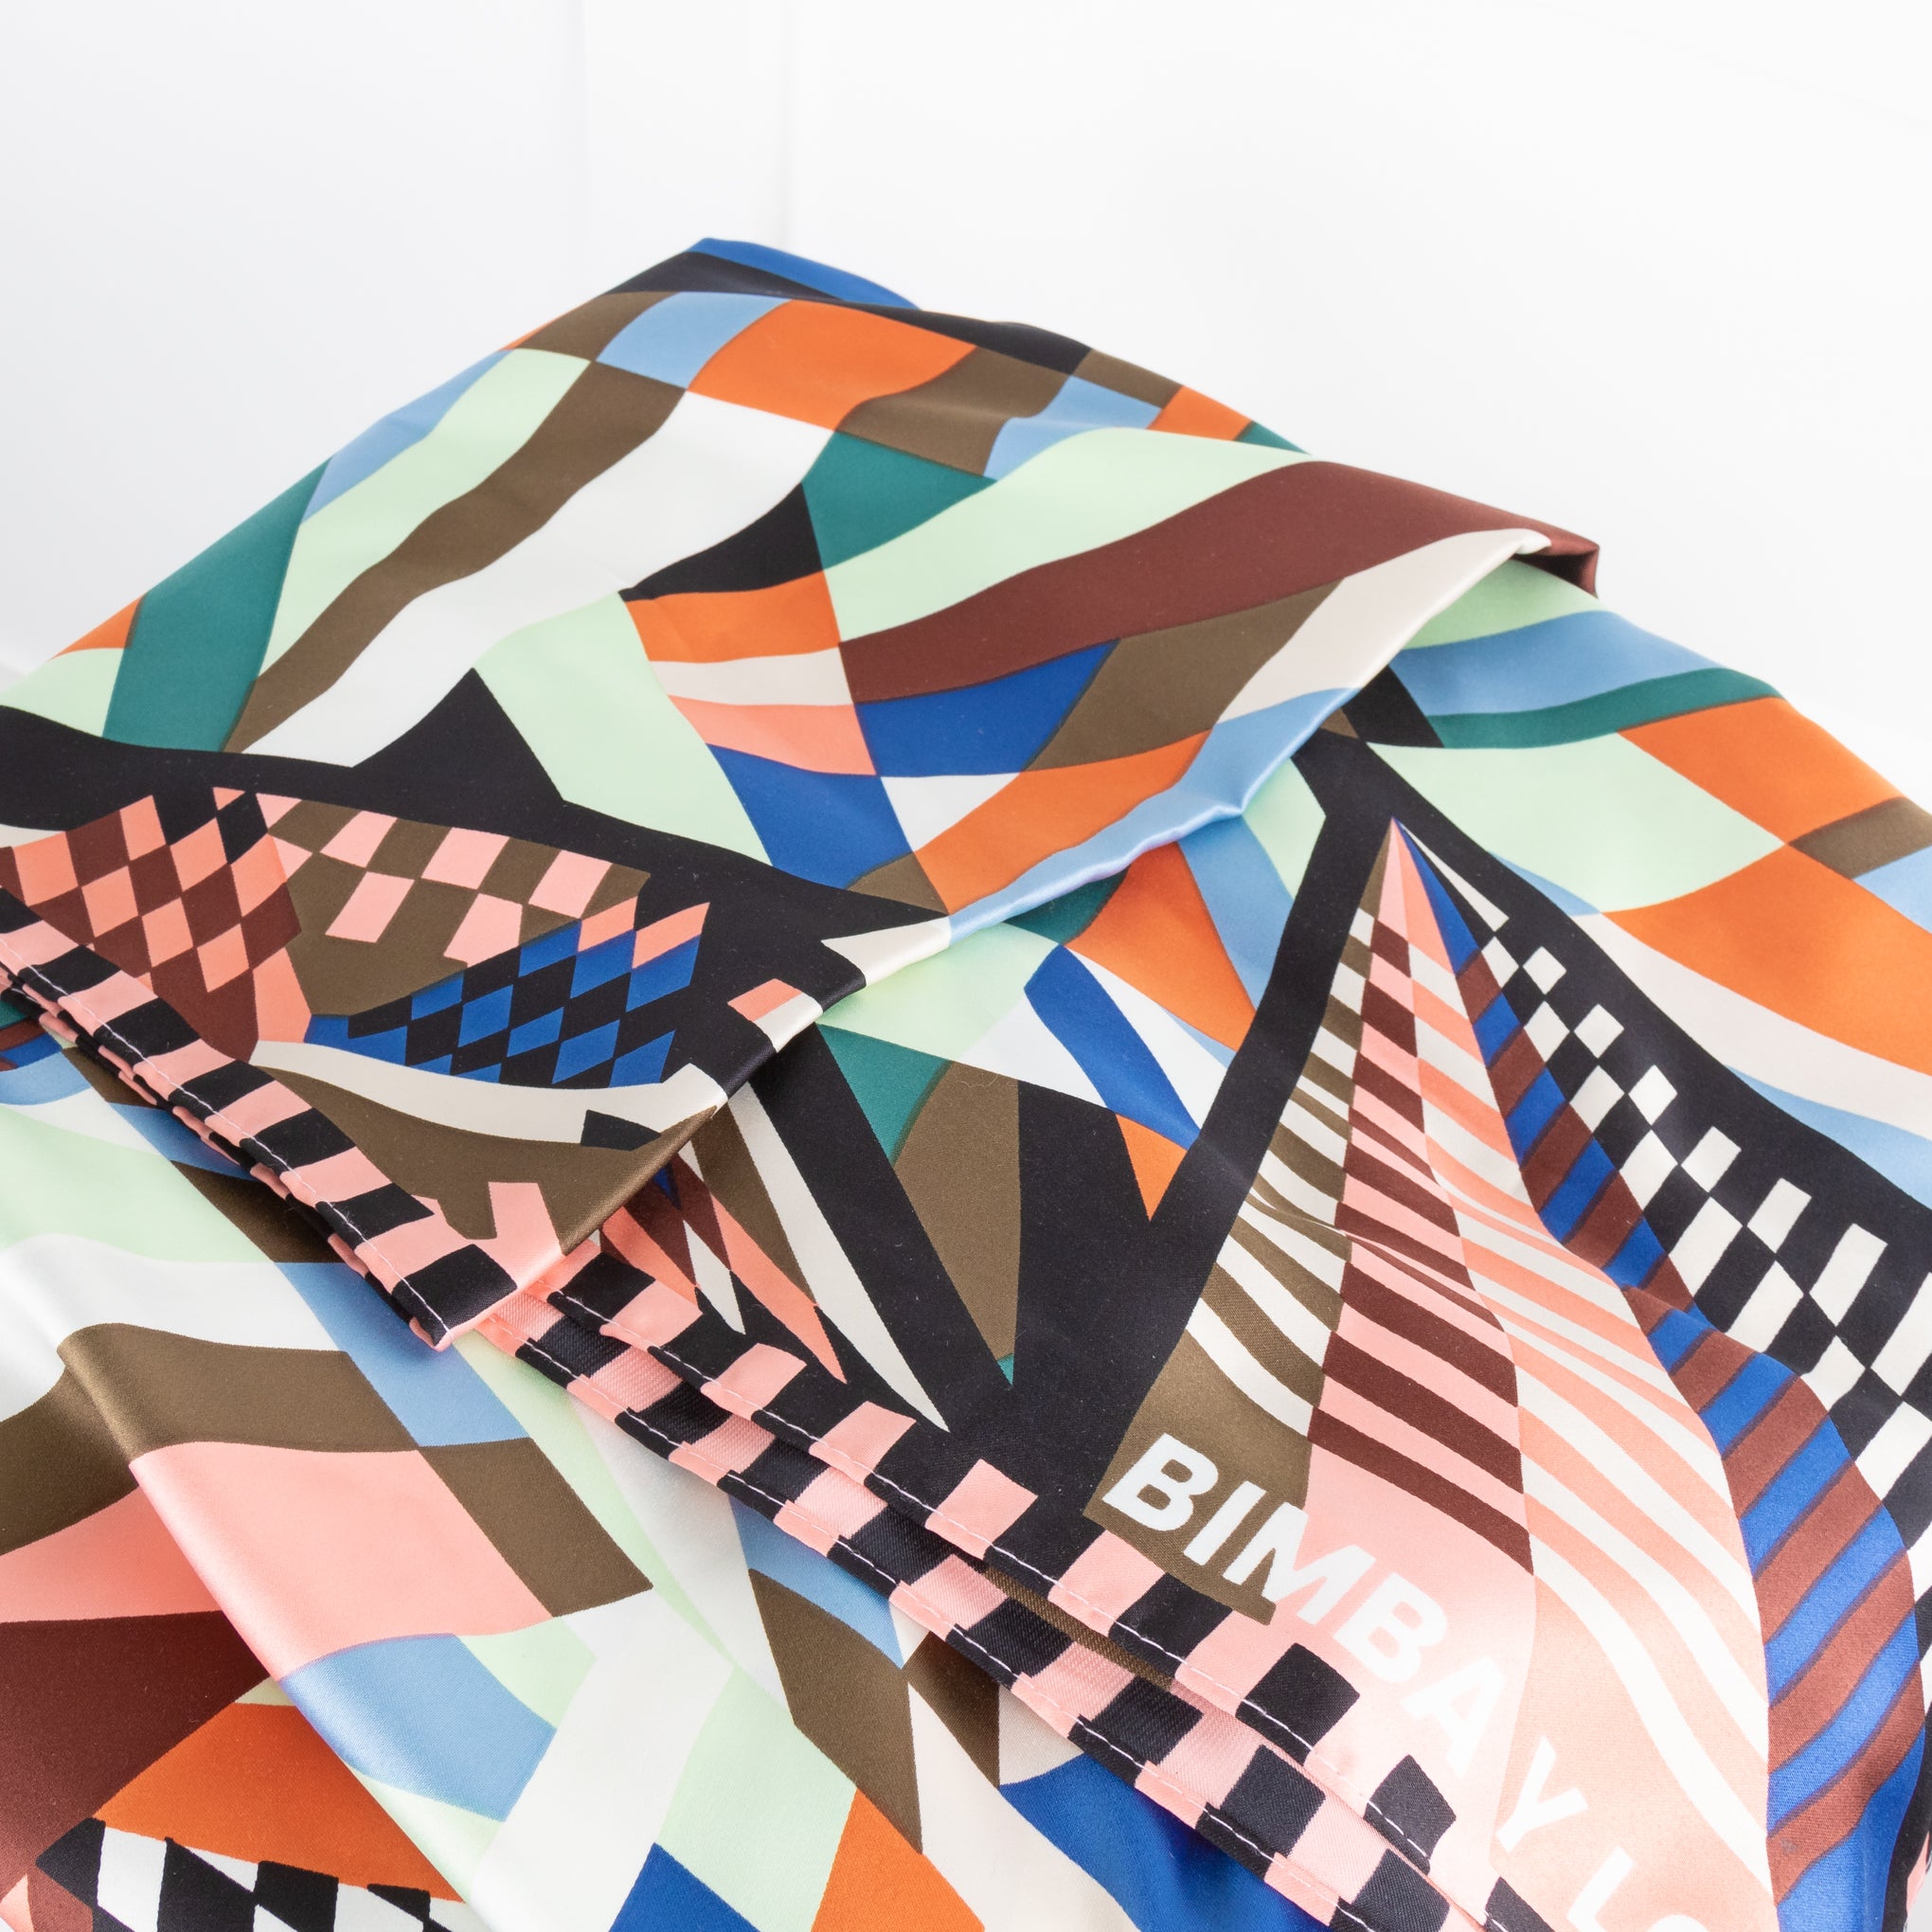 Bimba y Lola Scarves outlet - 1800 products on sale